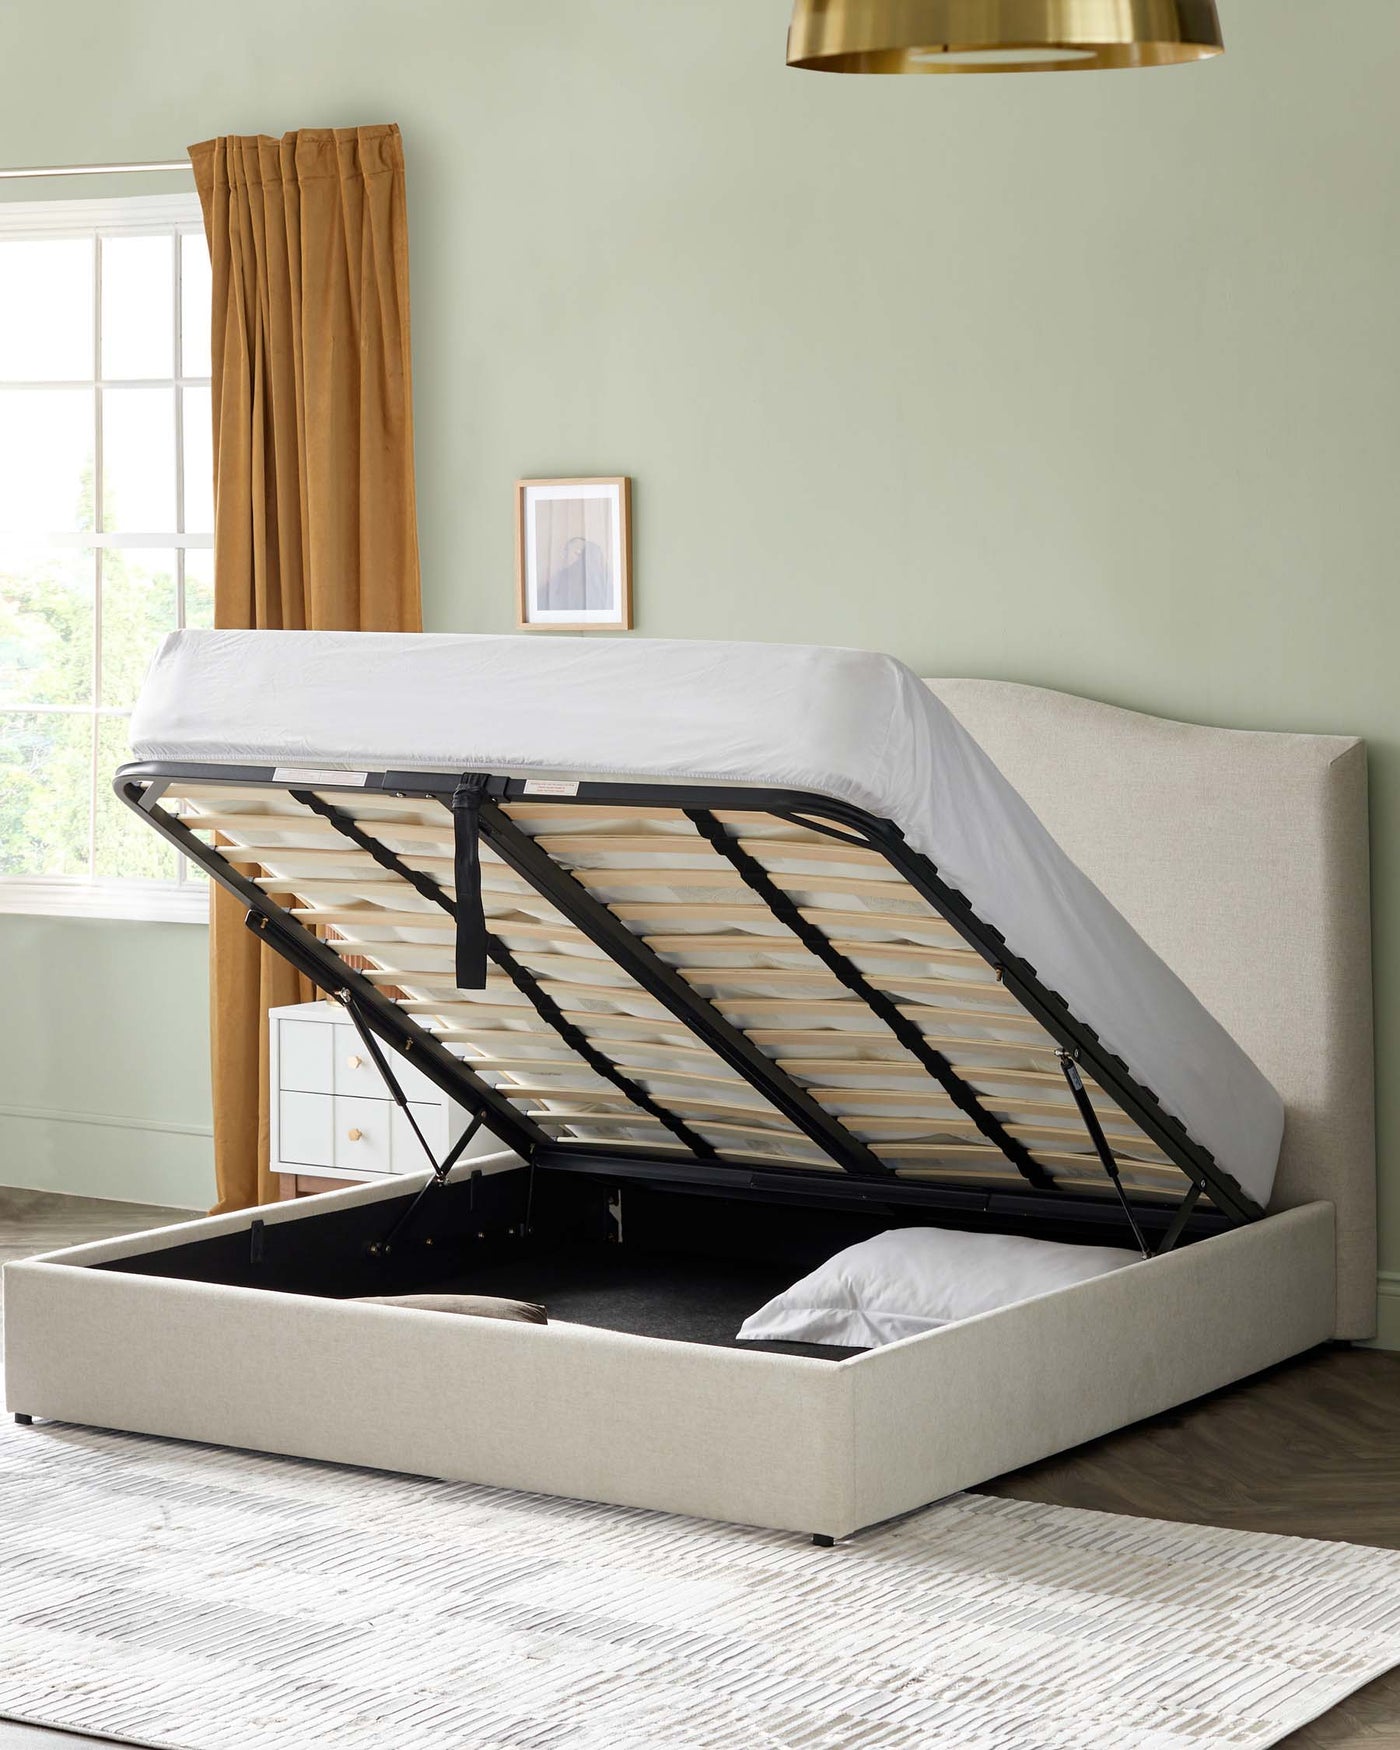 Beige upholstered storage bed with gas-lift mechanism revealing spacious under-mattress compartment, displayed with mattress partially lifted, set in a room with a muted green wall and wooden flooring.